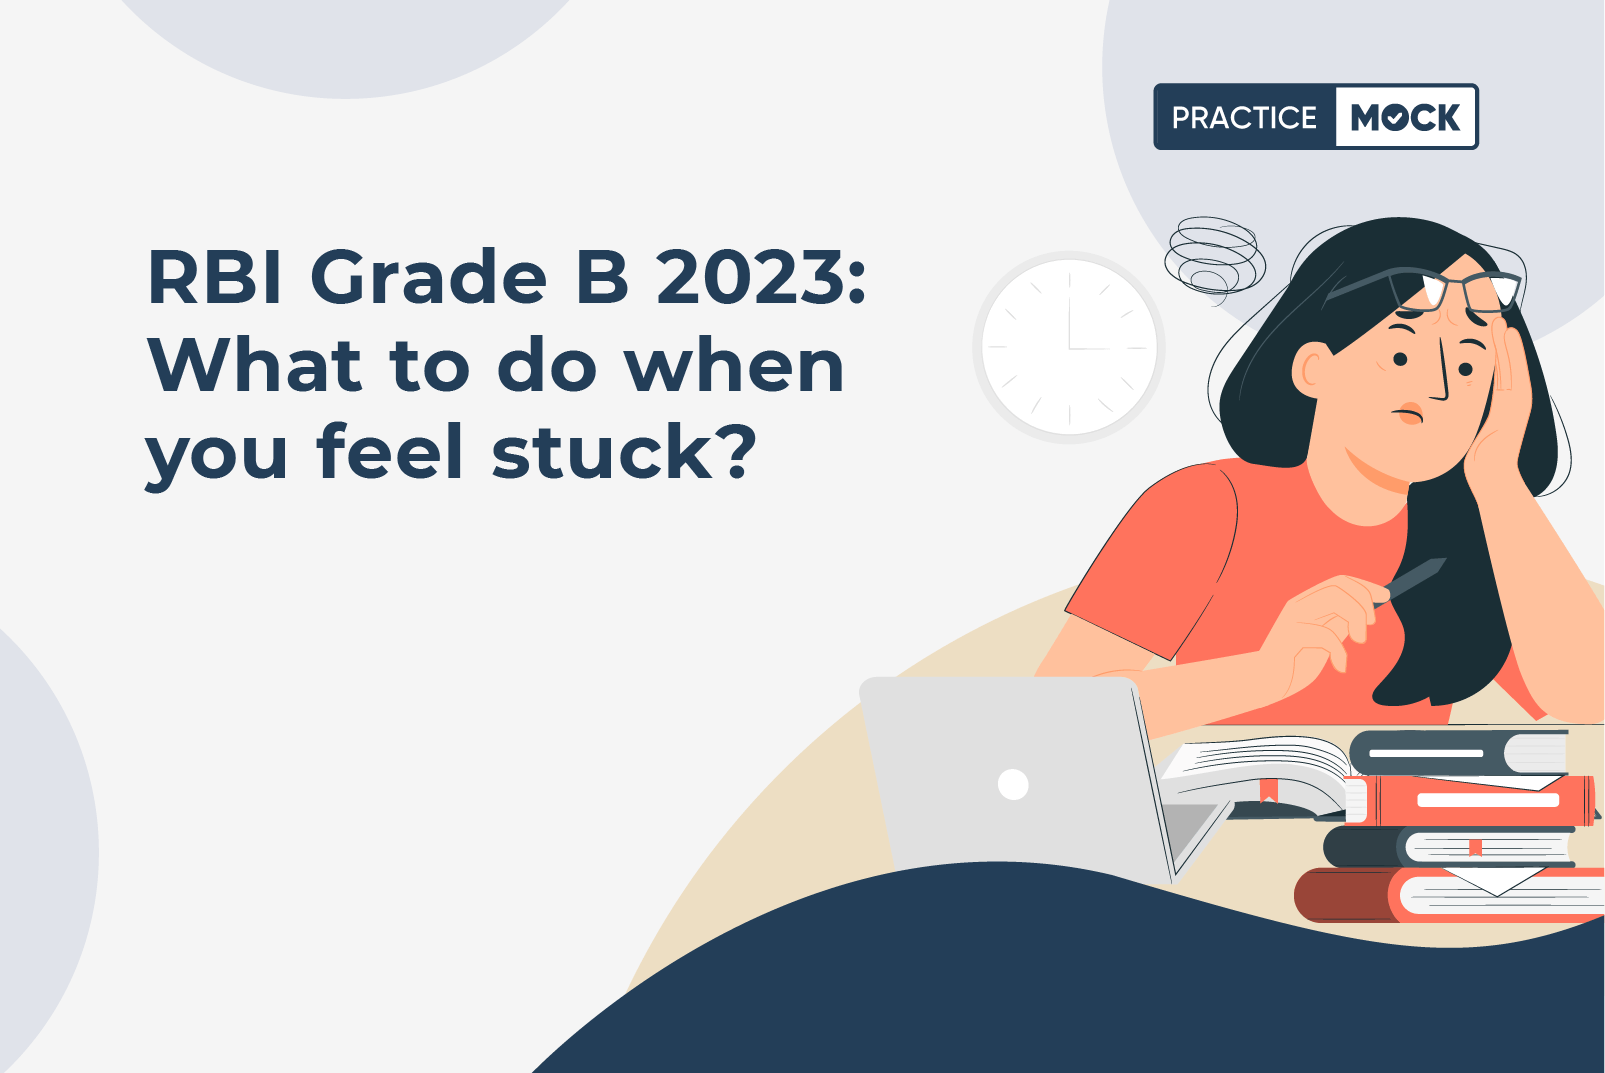 RBI Grade B - What to do when you feel stuck?